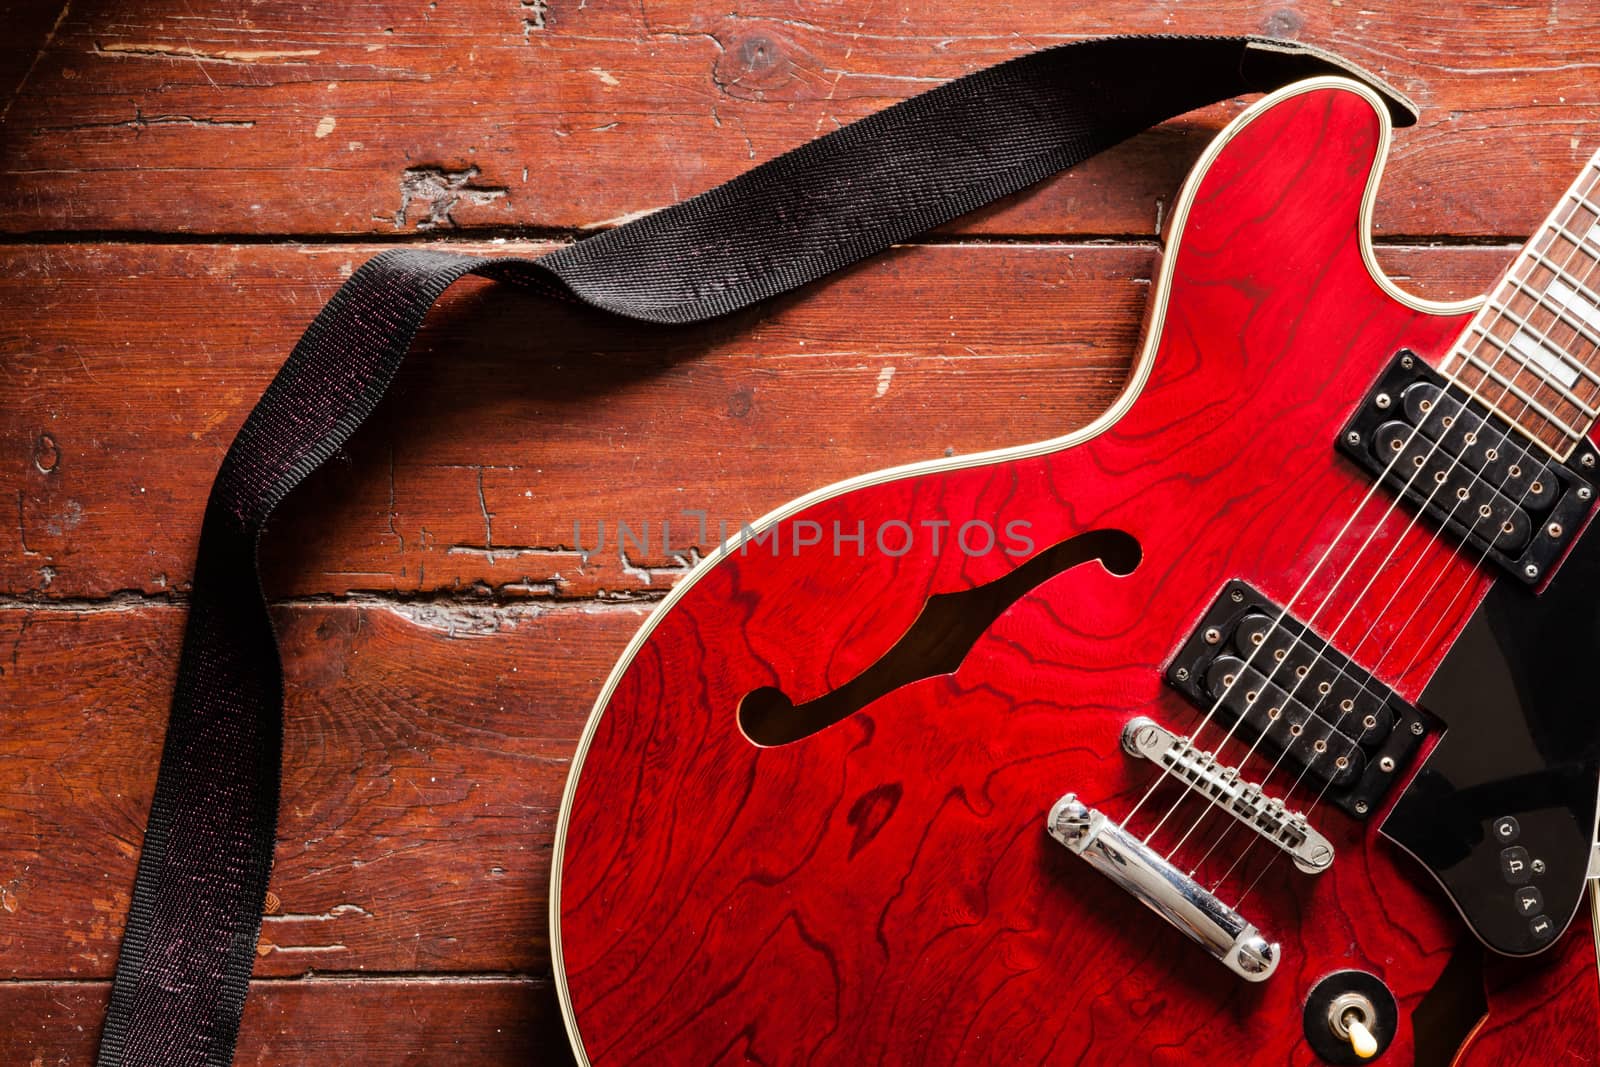 Electric guitar on wood background illuminated by natural daylight